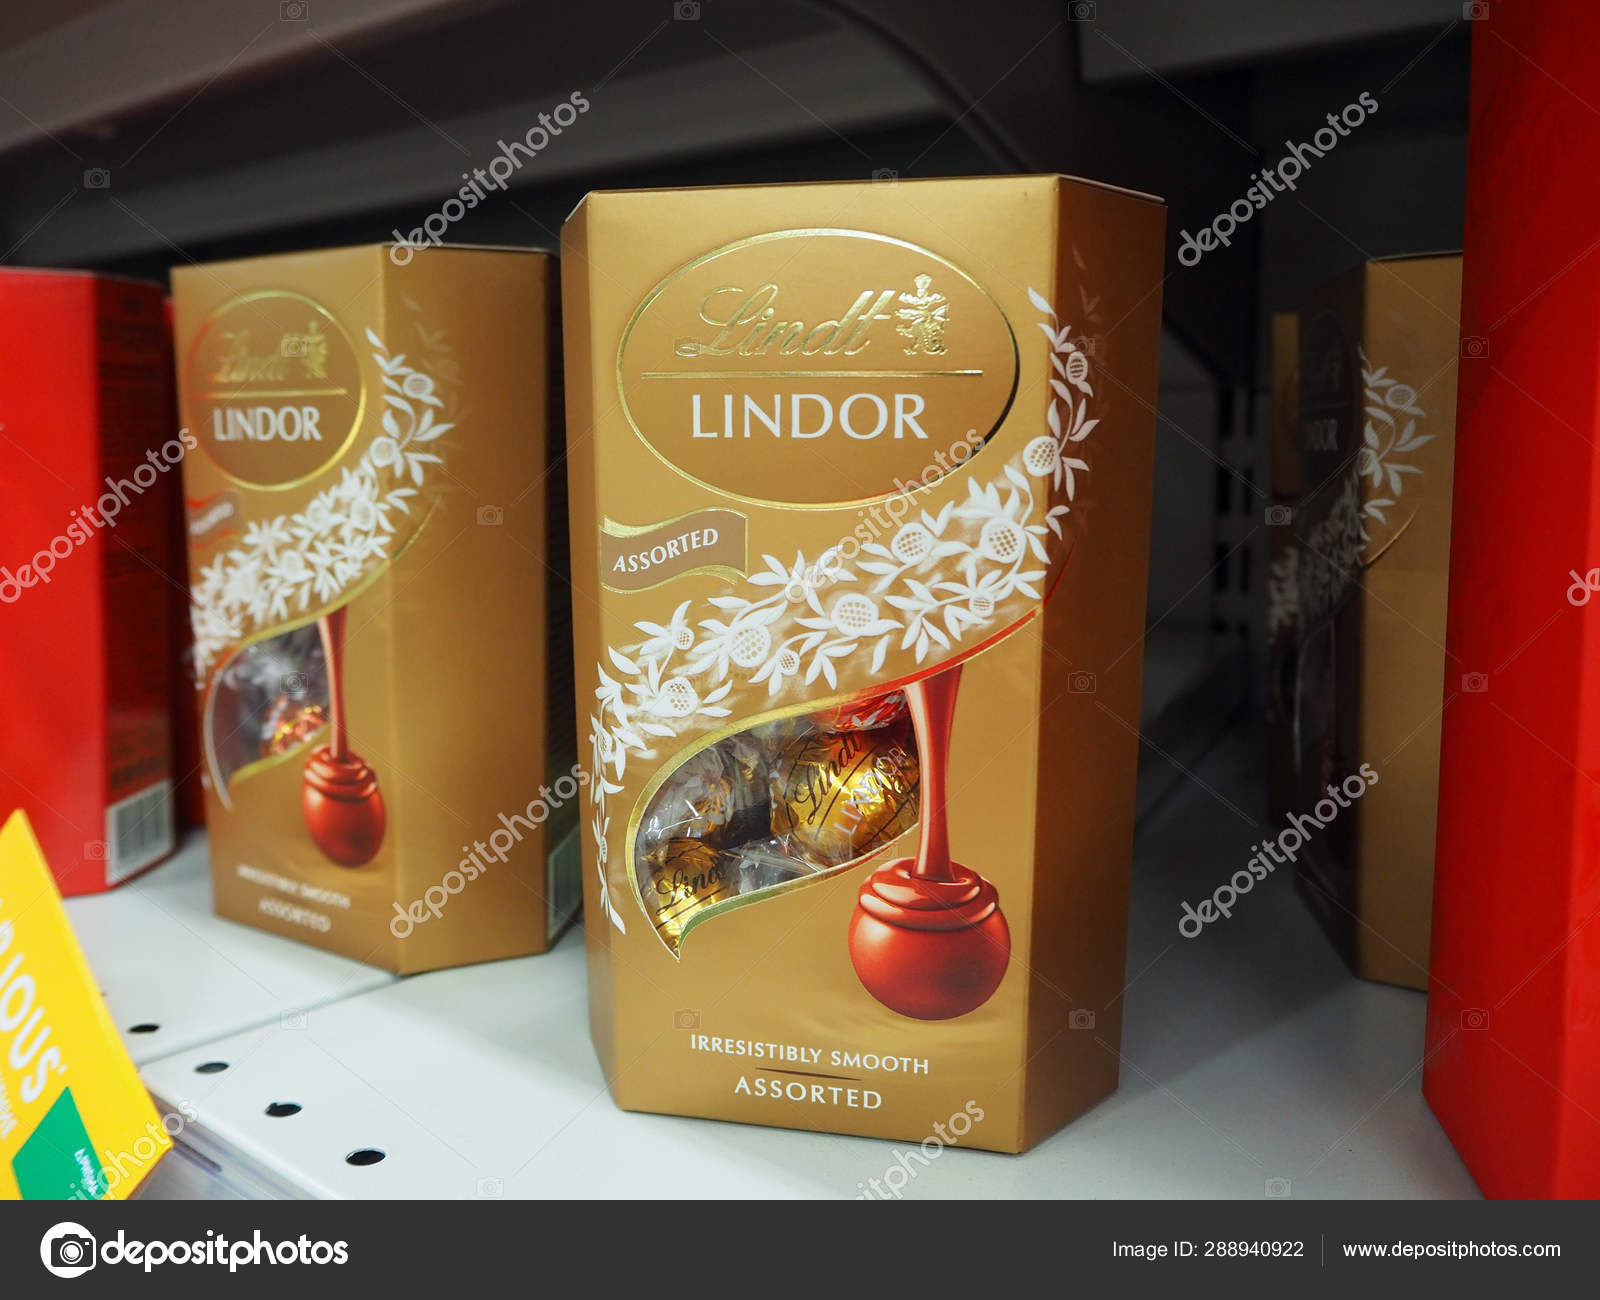 Lindt Chocolate Pictures Lindt Chocolate Stock Photos Images Depositphotos